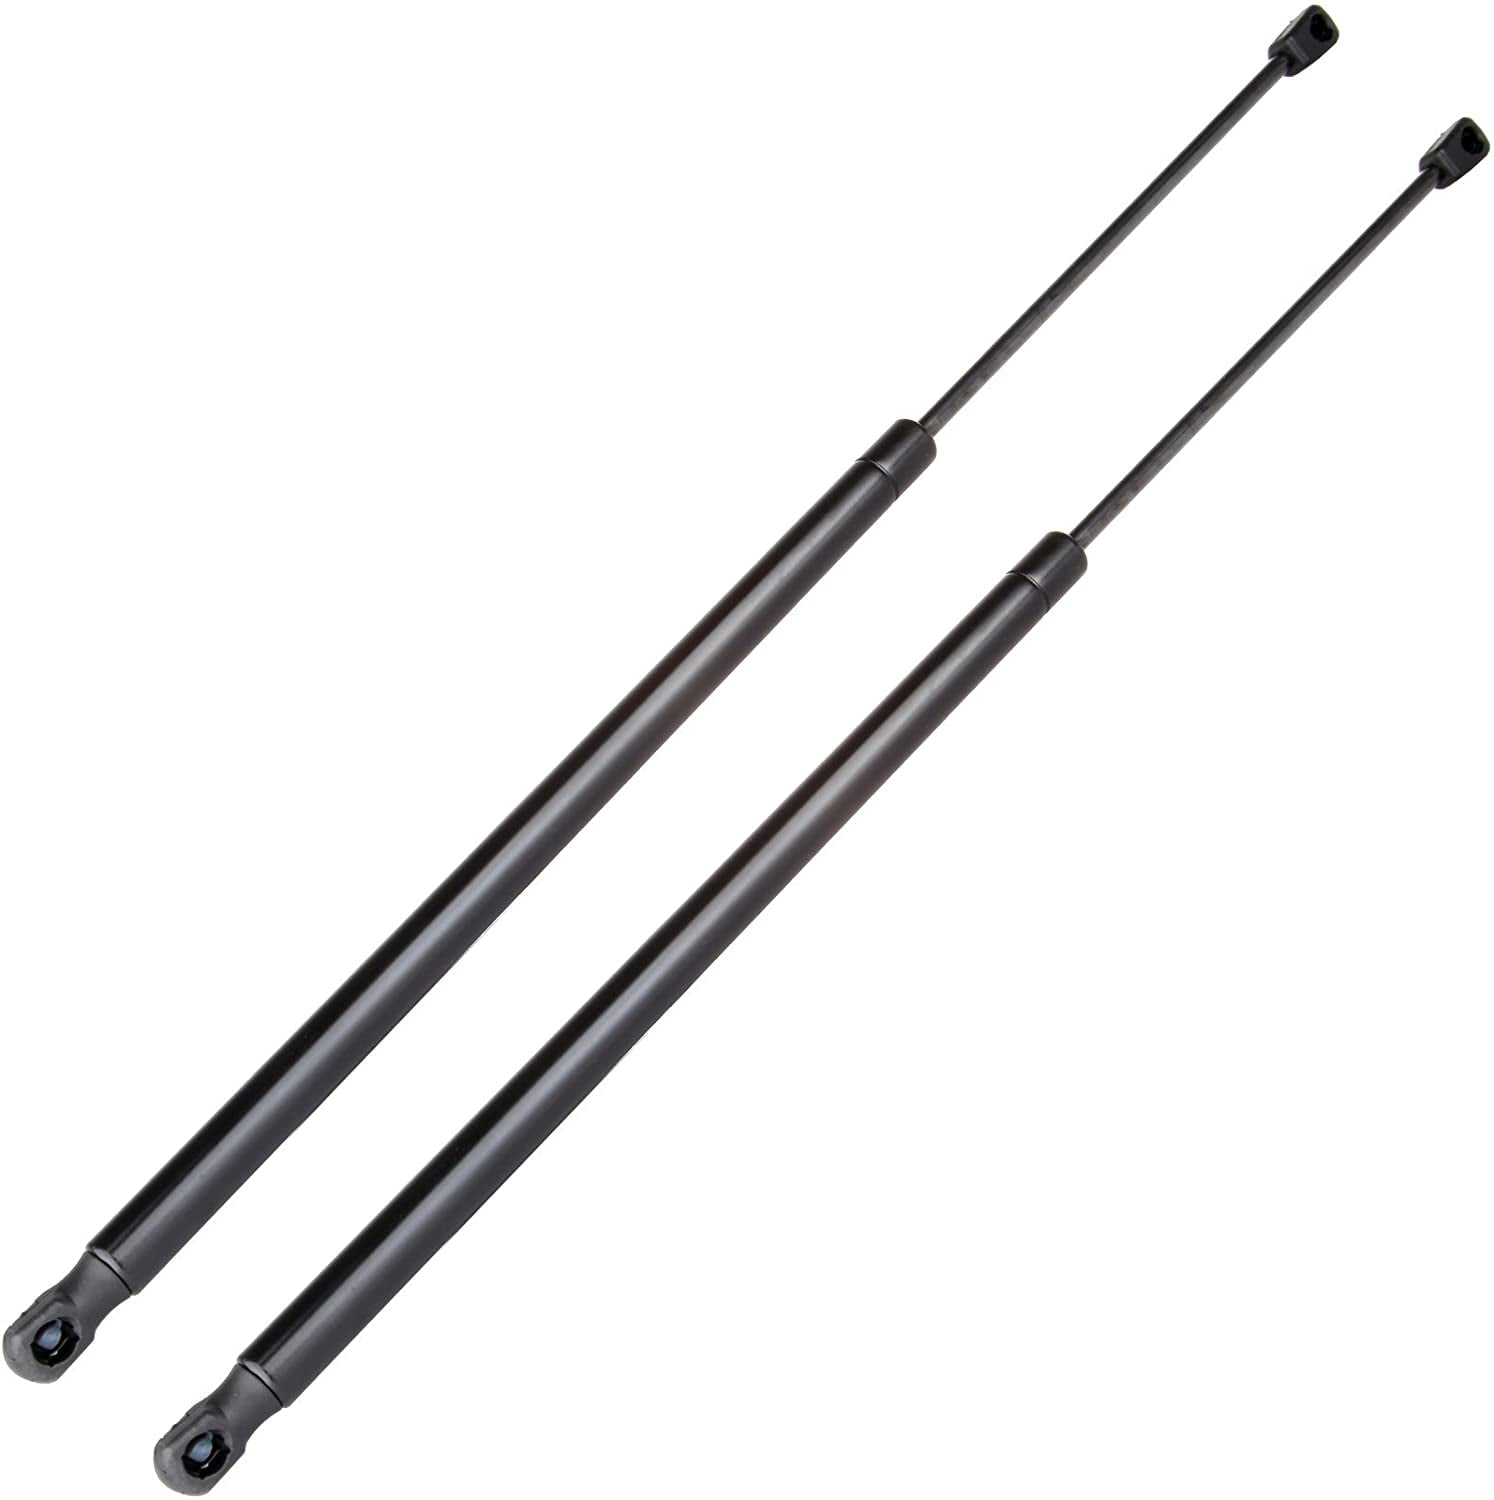 2 pc Strong Arm Liftgate Lift Supports for 2006-2010 Jeep Commander Body pj